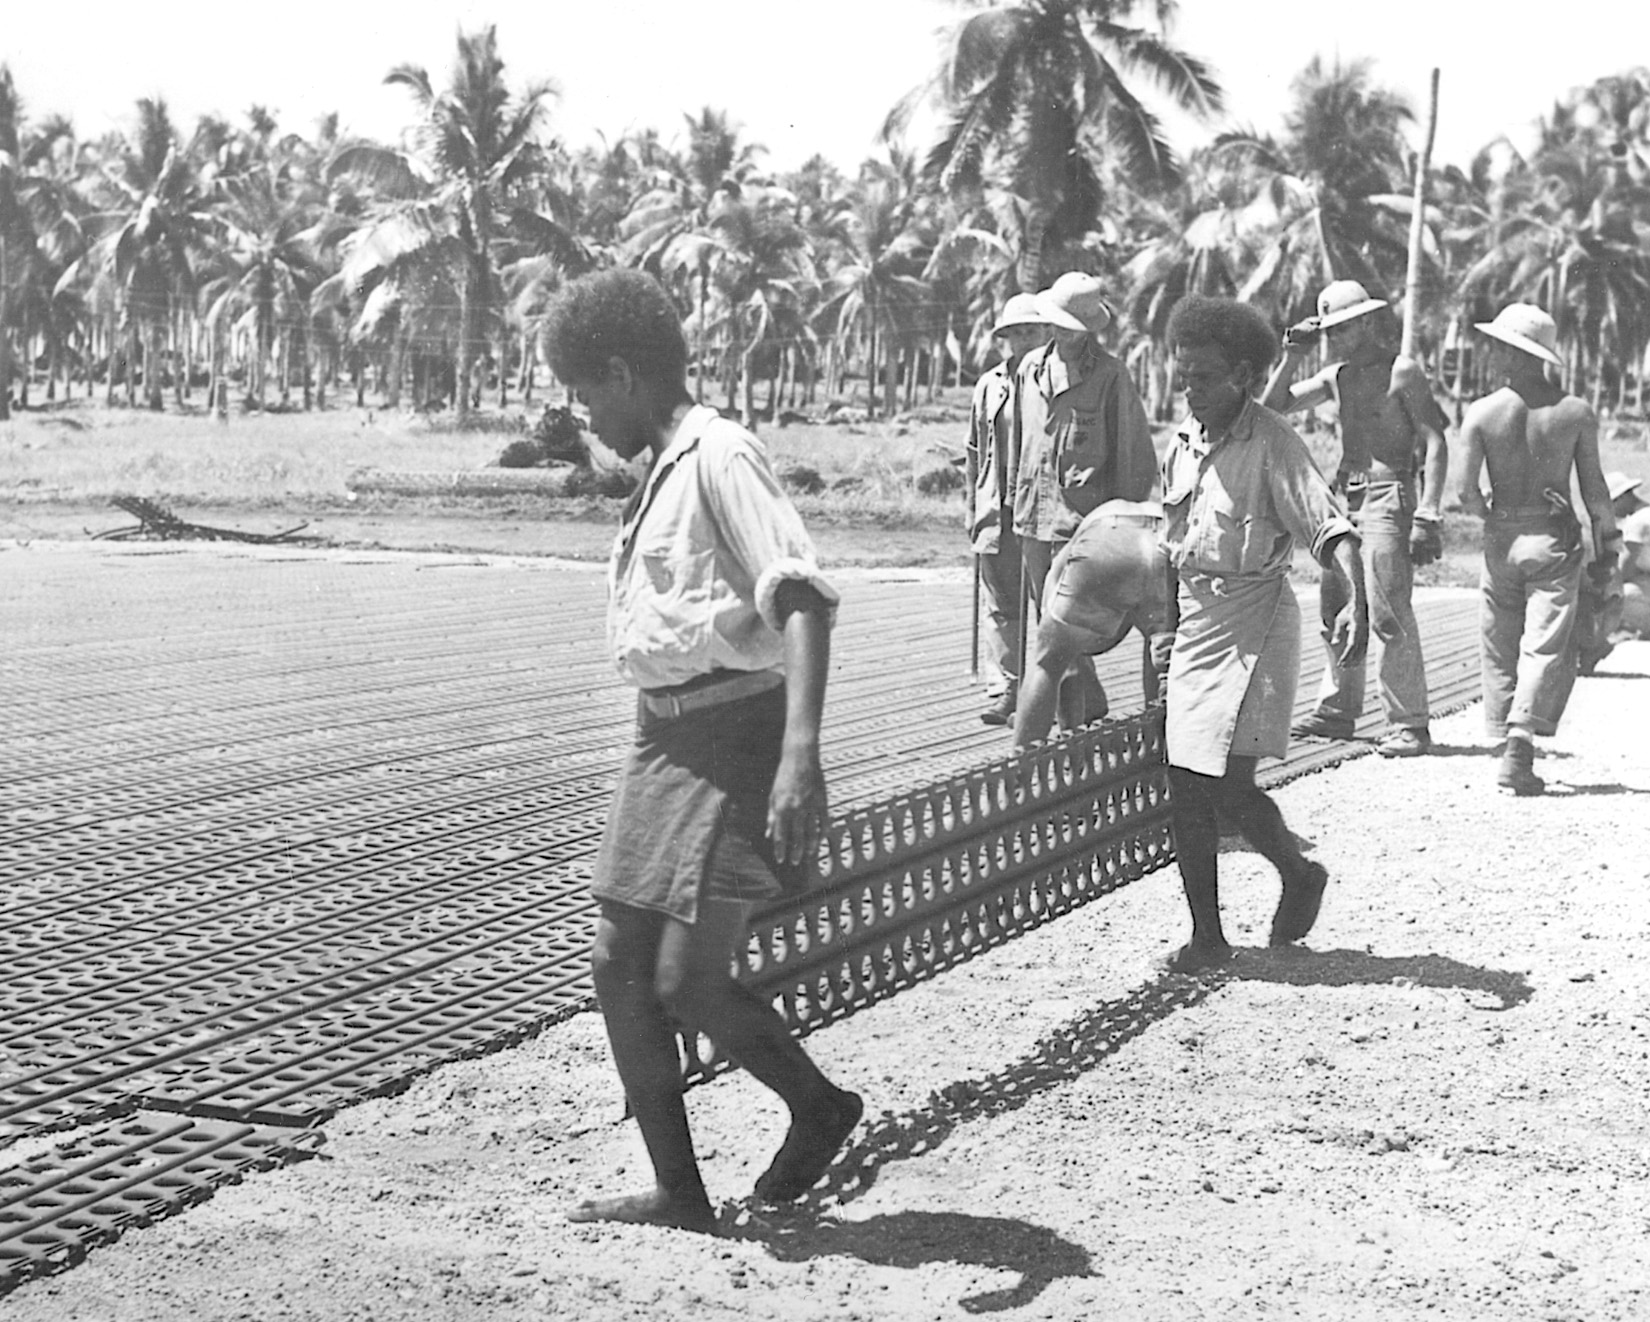 Native and American workers rush to complete the airfield the Japanese had begun to build at Lunga on Guadalcanal. Coast watchers had reported on Japanese progress in building the airfield, and from strategic points around the island warned of impending attacks on the area. The airfield was named Henderson Field.